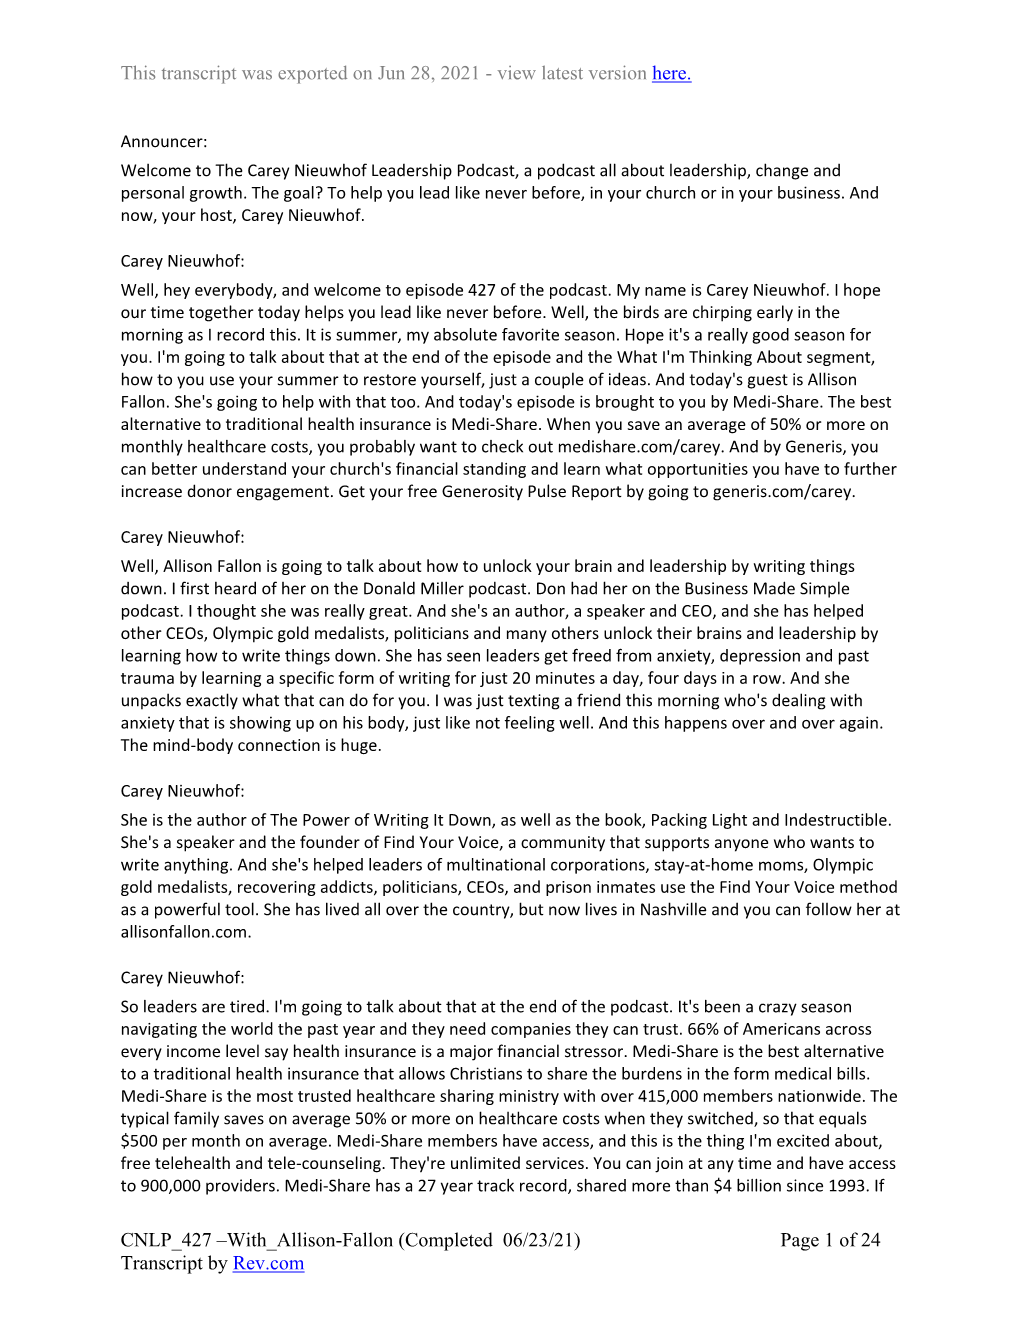 With Allison-Fallon (Completed 06/23/21) Page 1 of 24 Transcript by Rev.Com This Transcript Was Exported on Jun 28, 2021 - View Latest Version Here